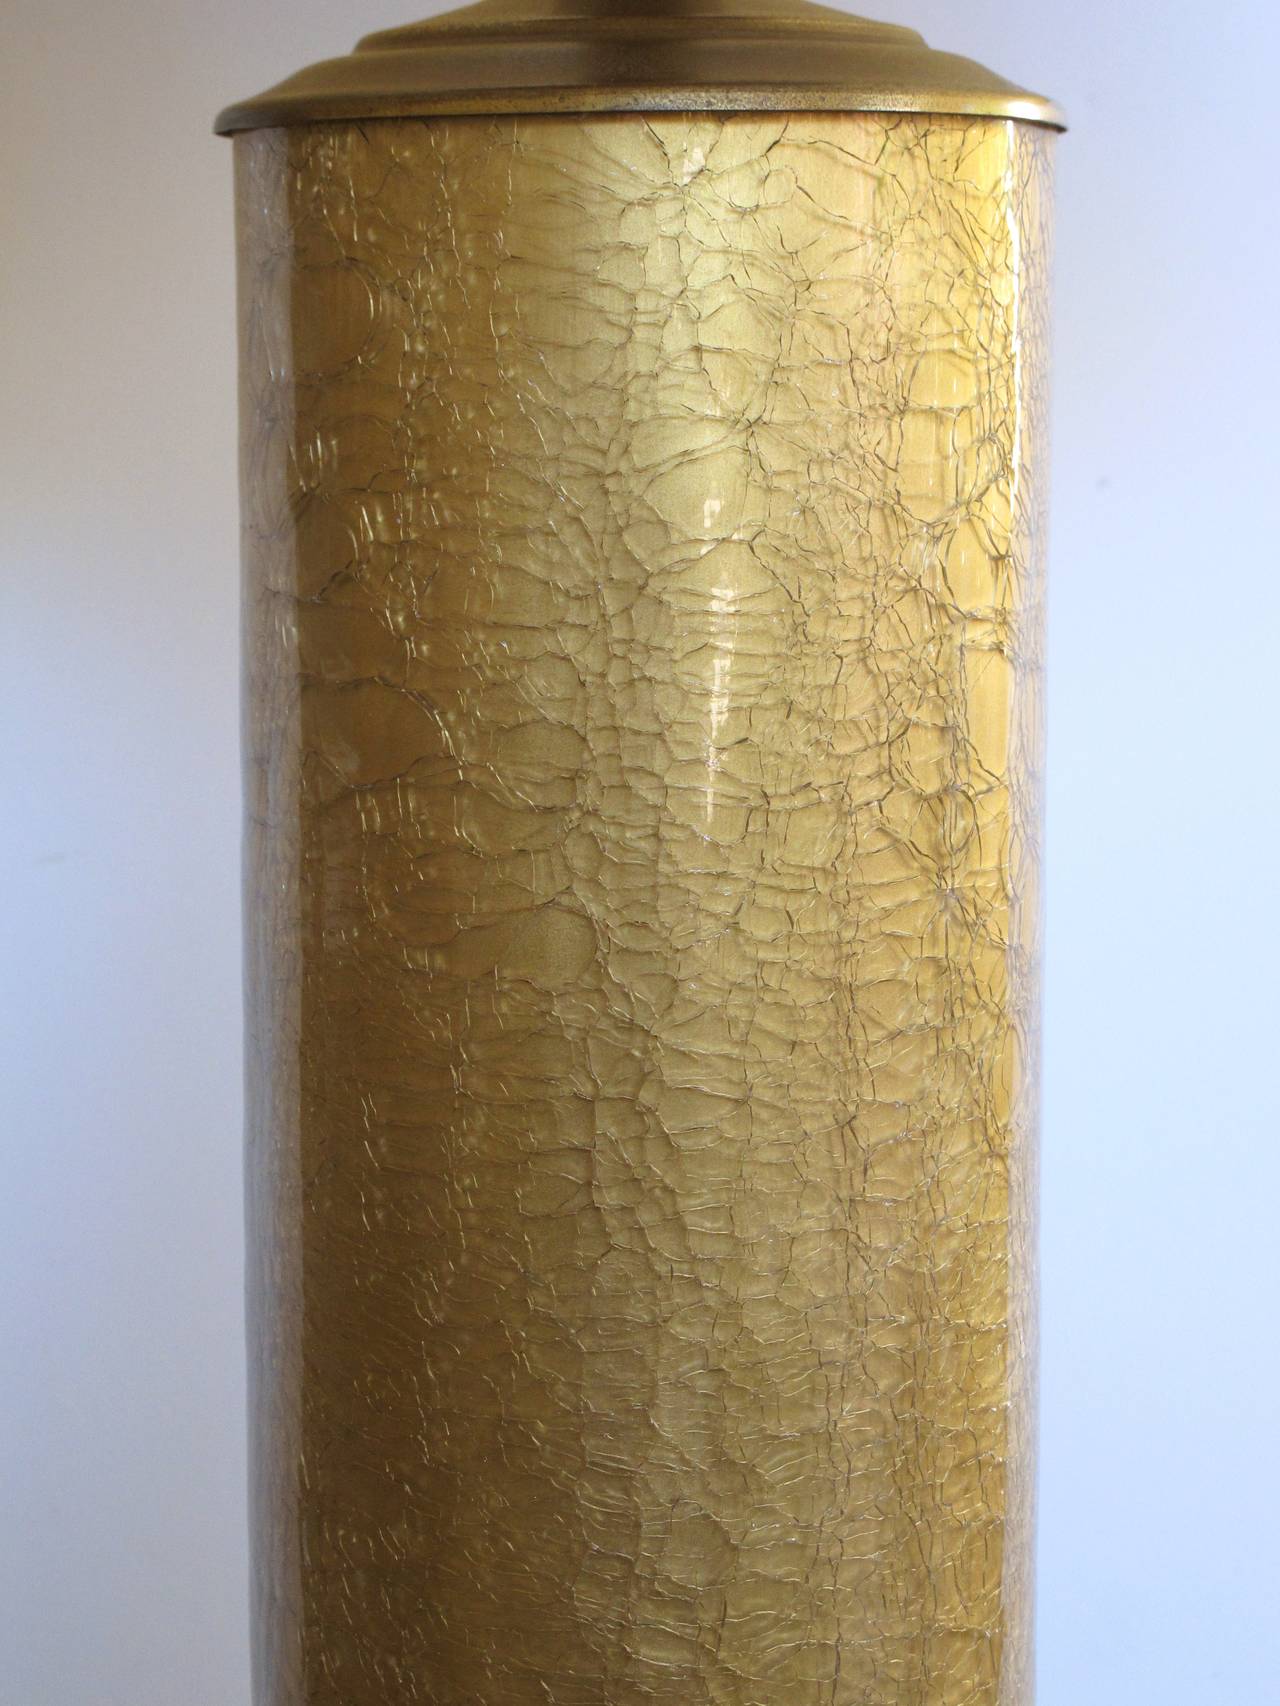 A stylish pair of American mid-century Hollywood regency cylindrical gold crack lamps designed by Paul Hanson for Oxford Lamp Co; each well-made cased-glass lamp of finely crackled gold glass; with label underside